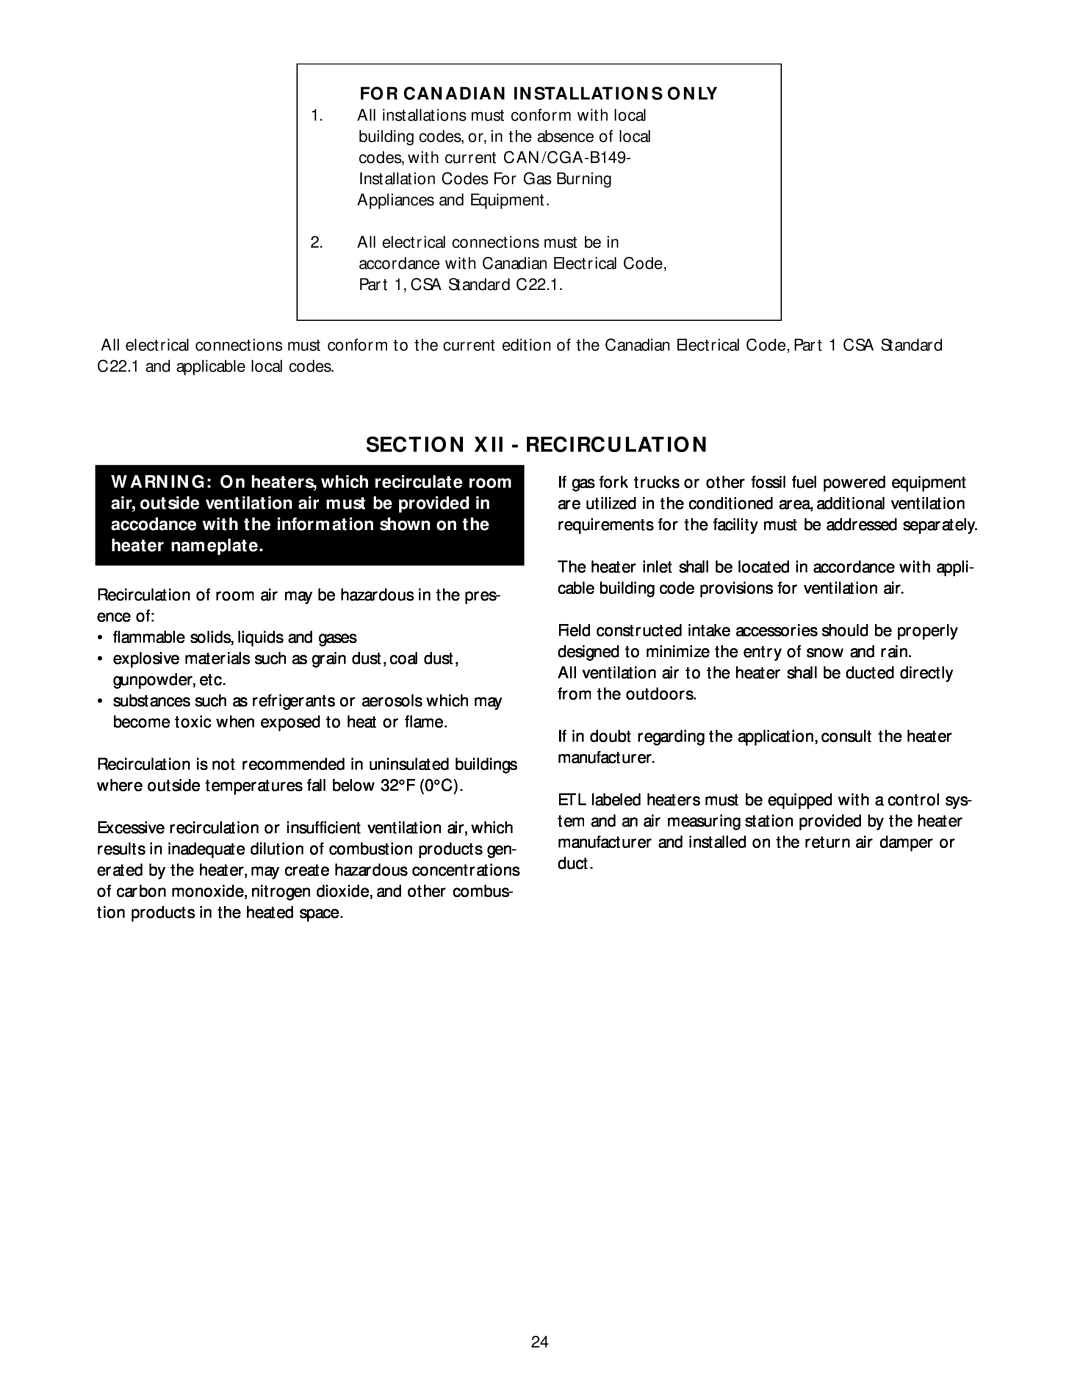 Wing Enterprises IOMWDF-1 specifications Section Xii - Recirculation, For Canadian Installations Only 